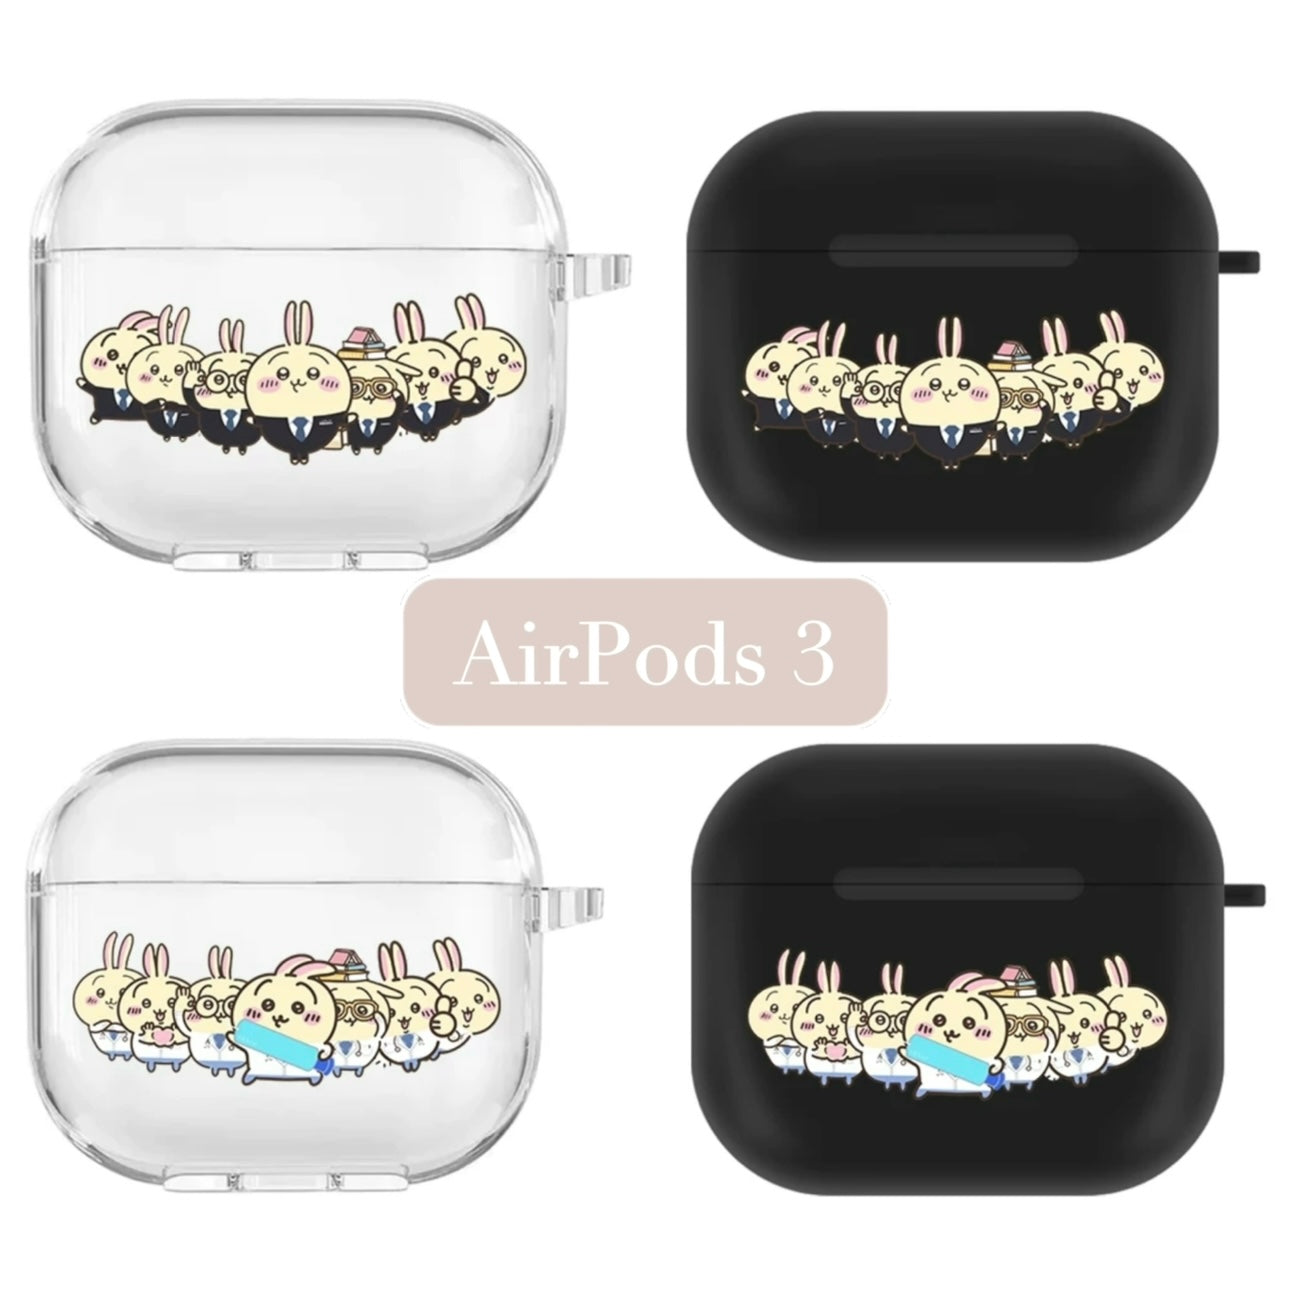 Japanese Cartoon ChiiKawa | Usagi Doctor & Black Suit AirPods AirPodsPro AirPods3 Case - Clear Black